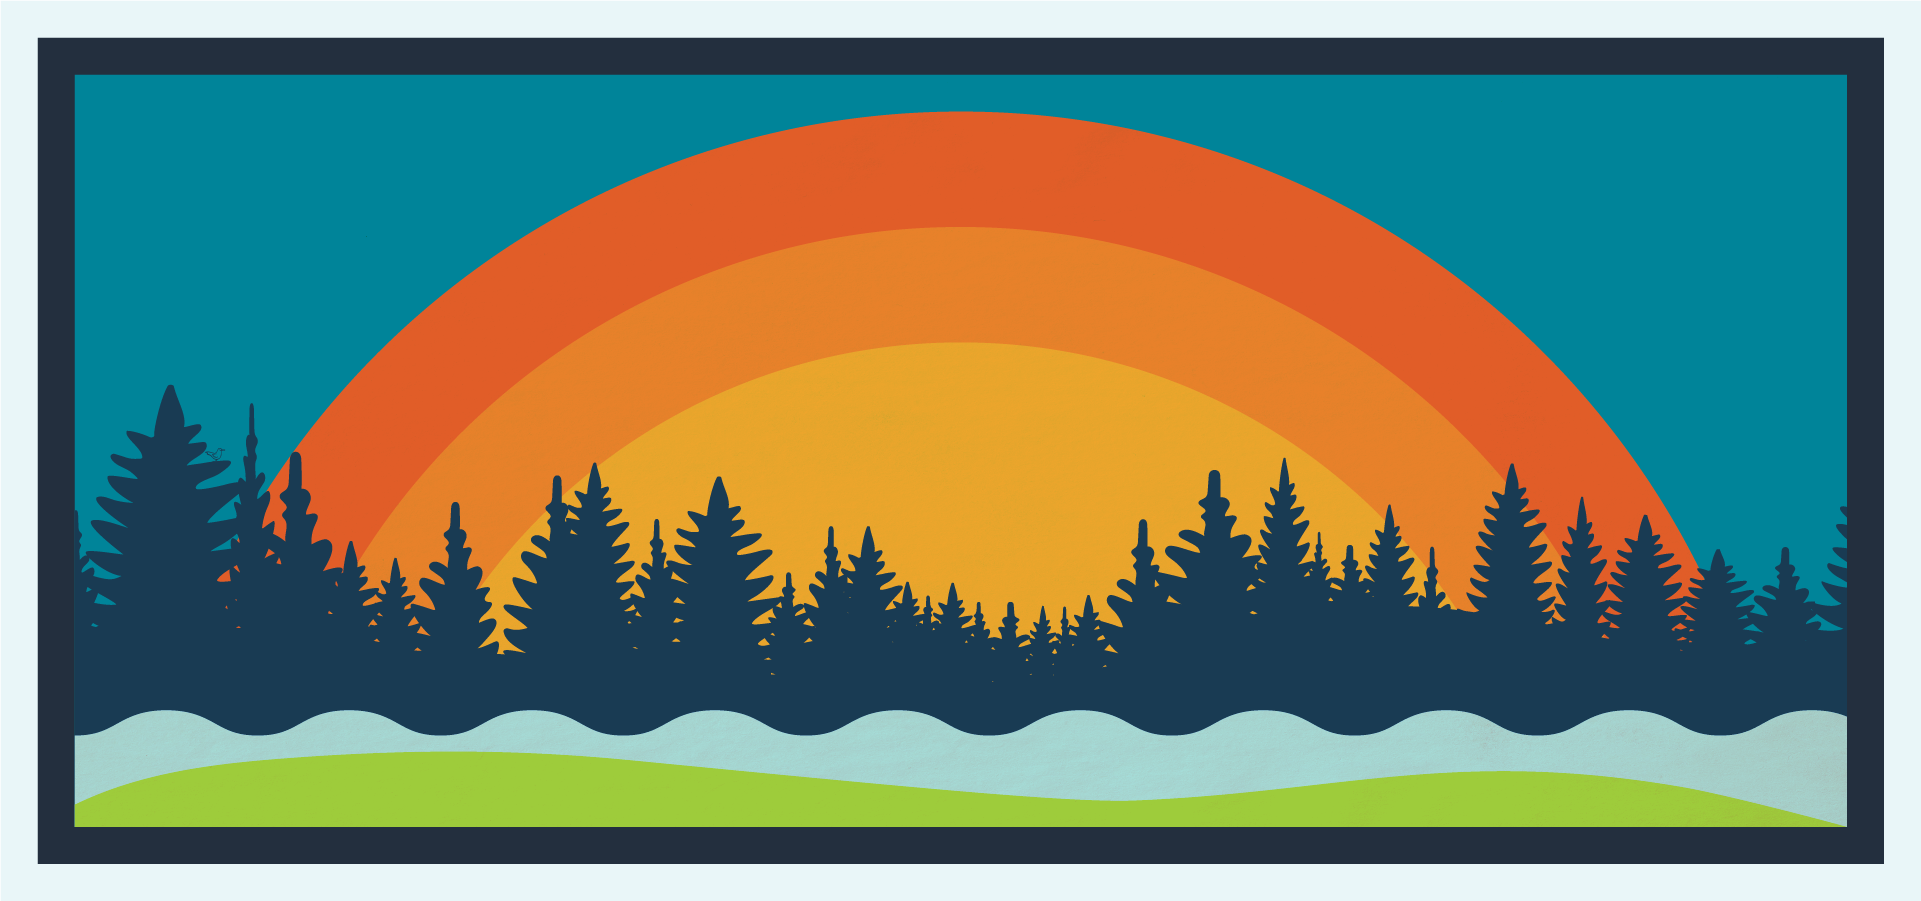 Sunset graphic with oranges, blues, and greens.